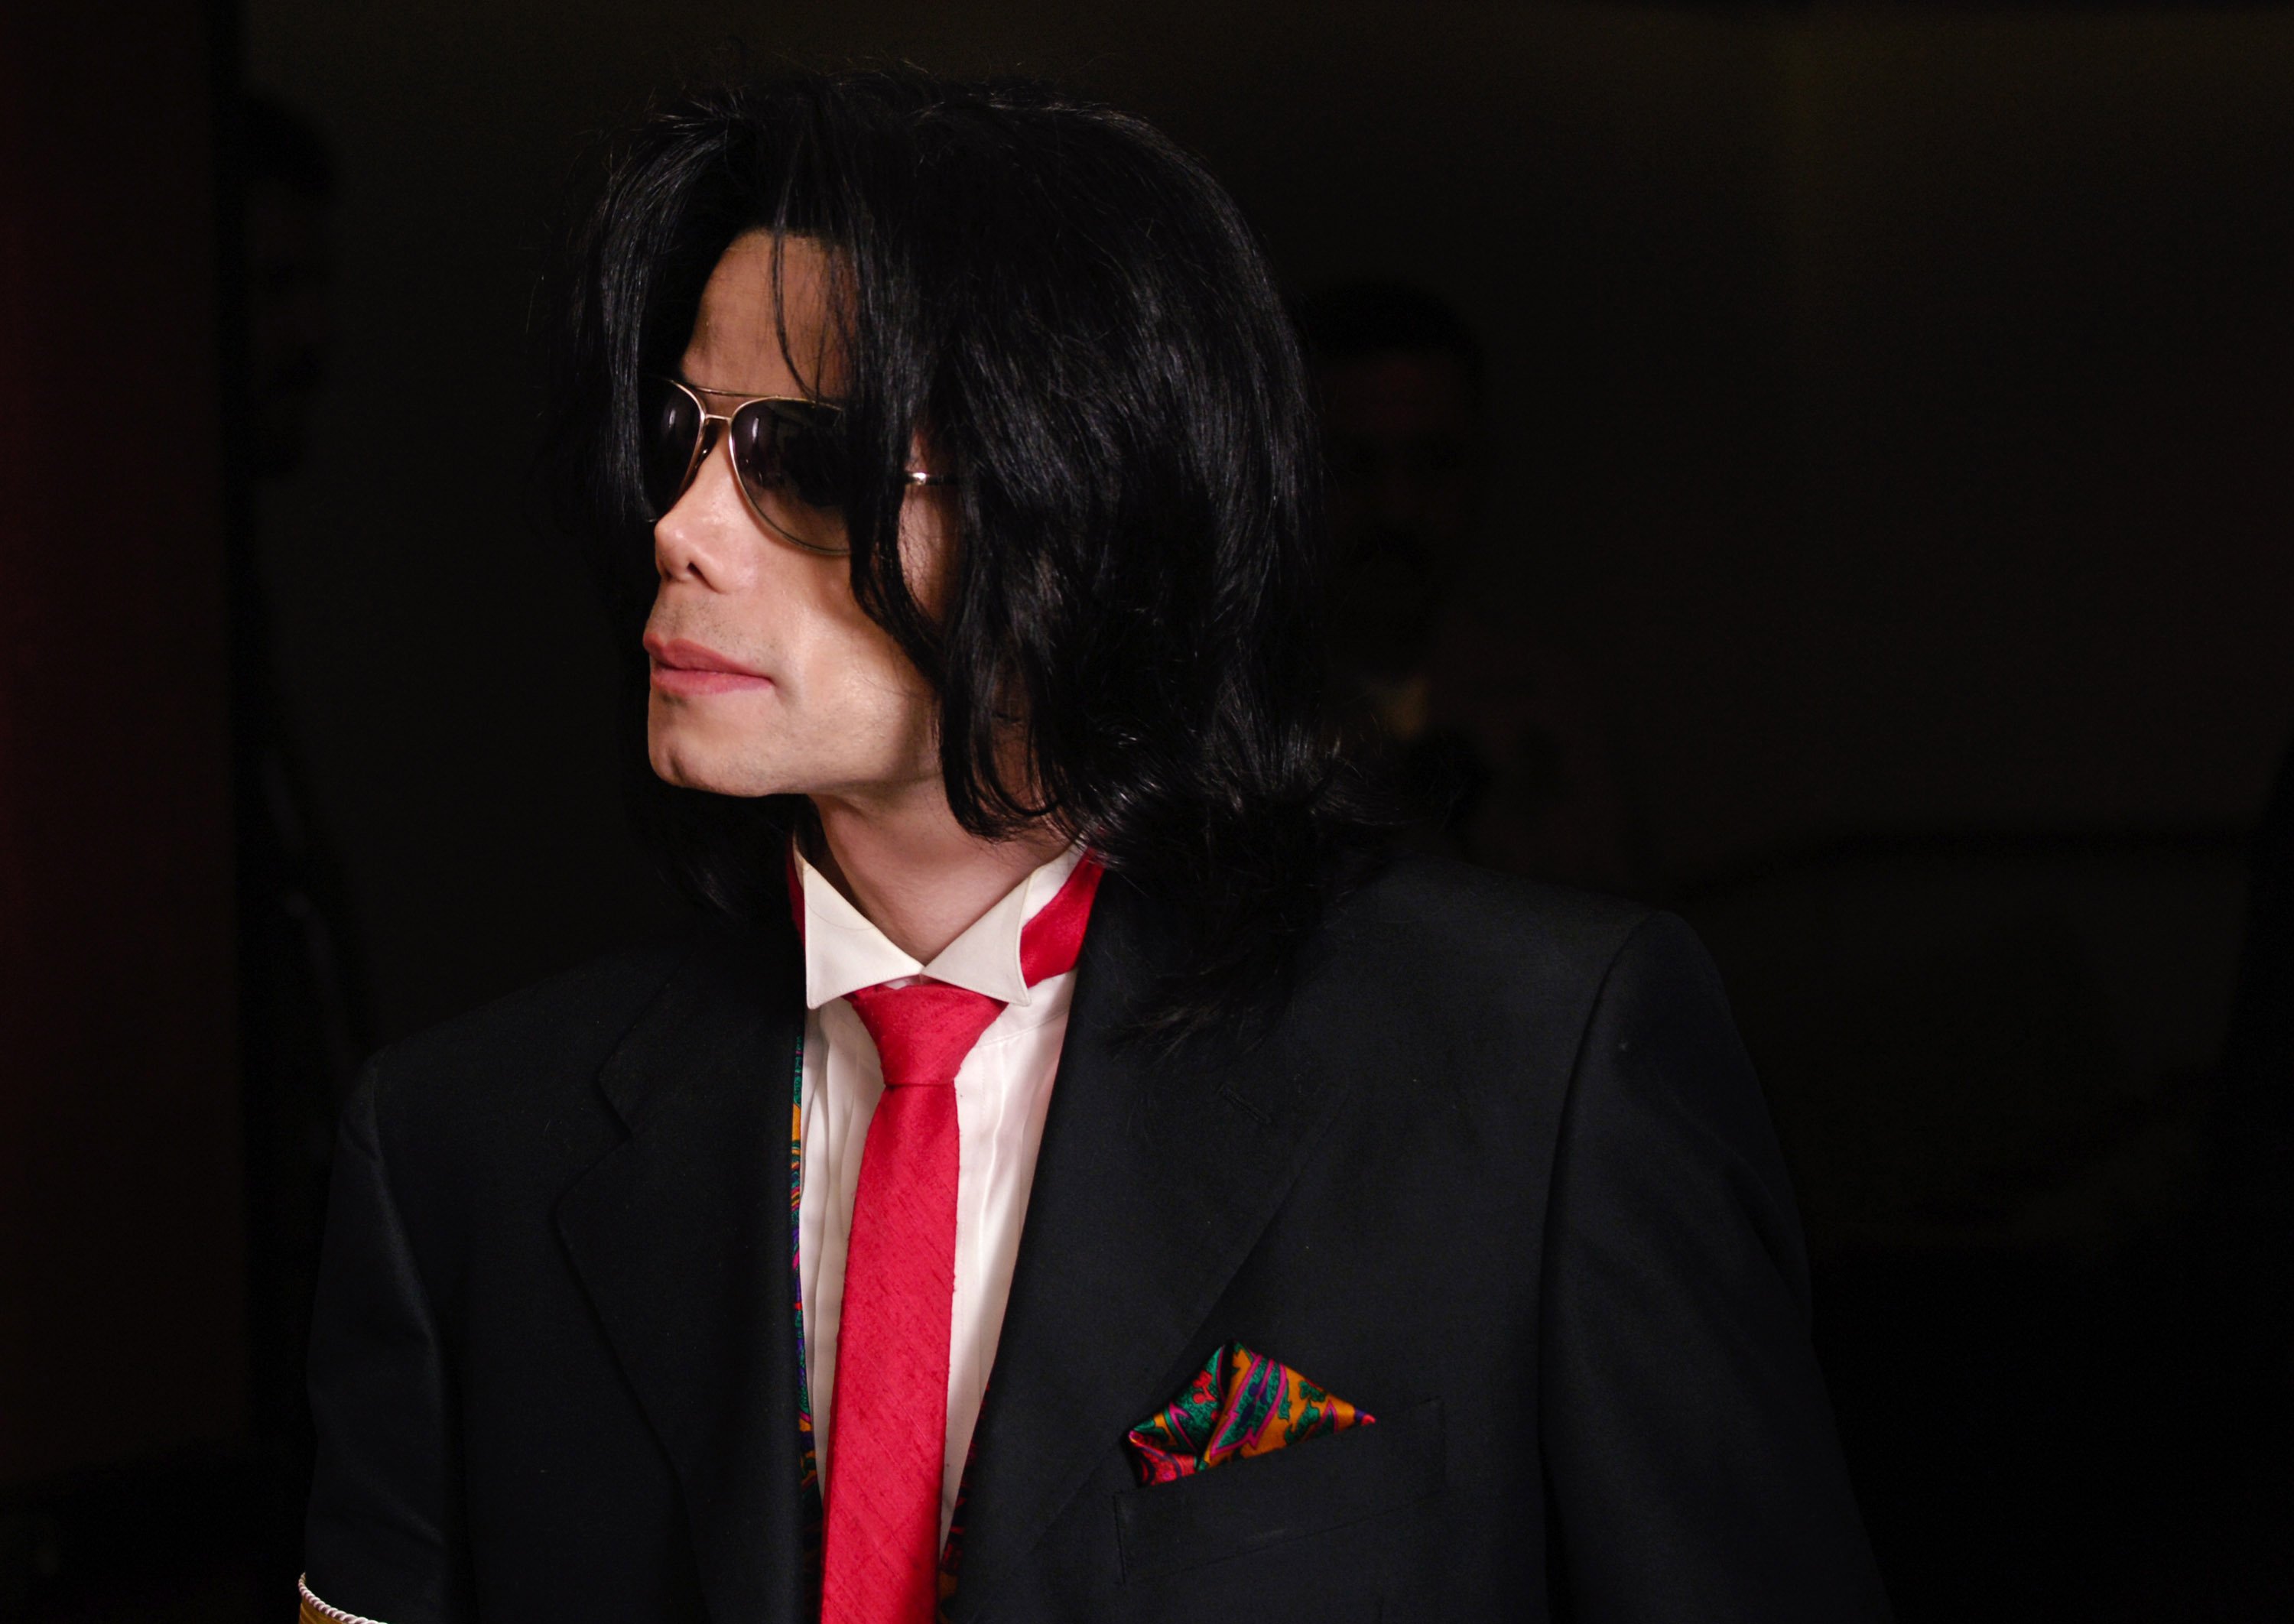 Michael Jackson leaves the courtroom following his trial in the Santa Barbara County Courthouse May 27, 2005. | Source: Getty Images